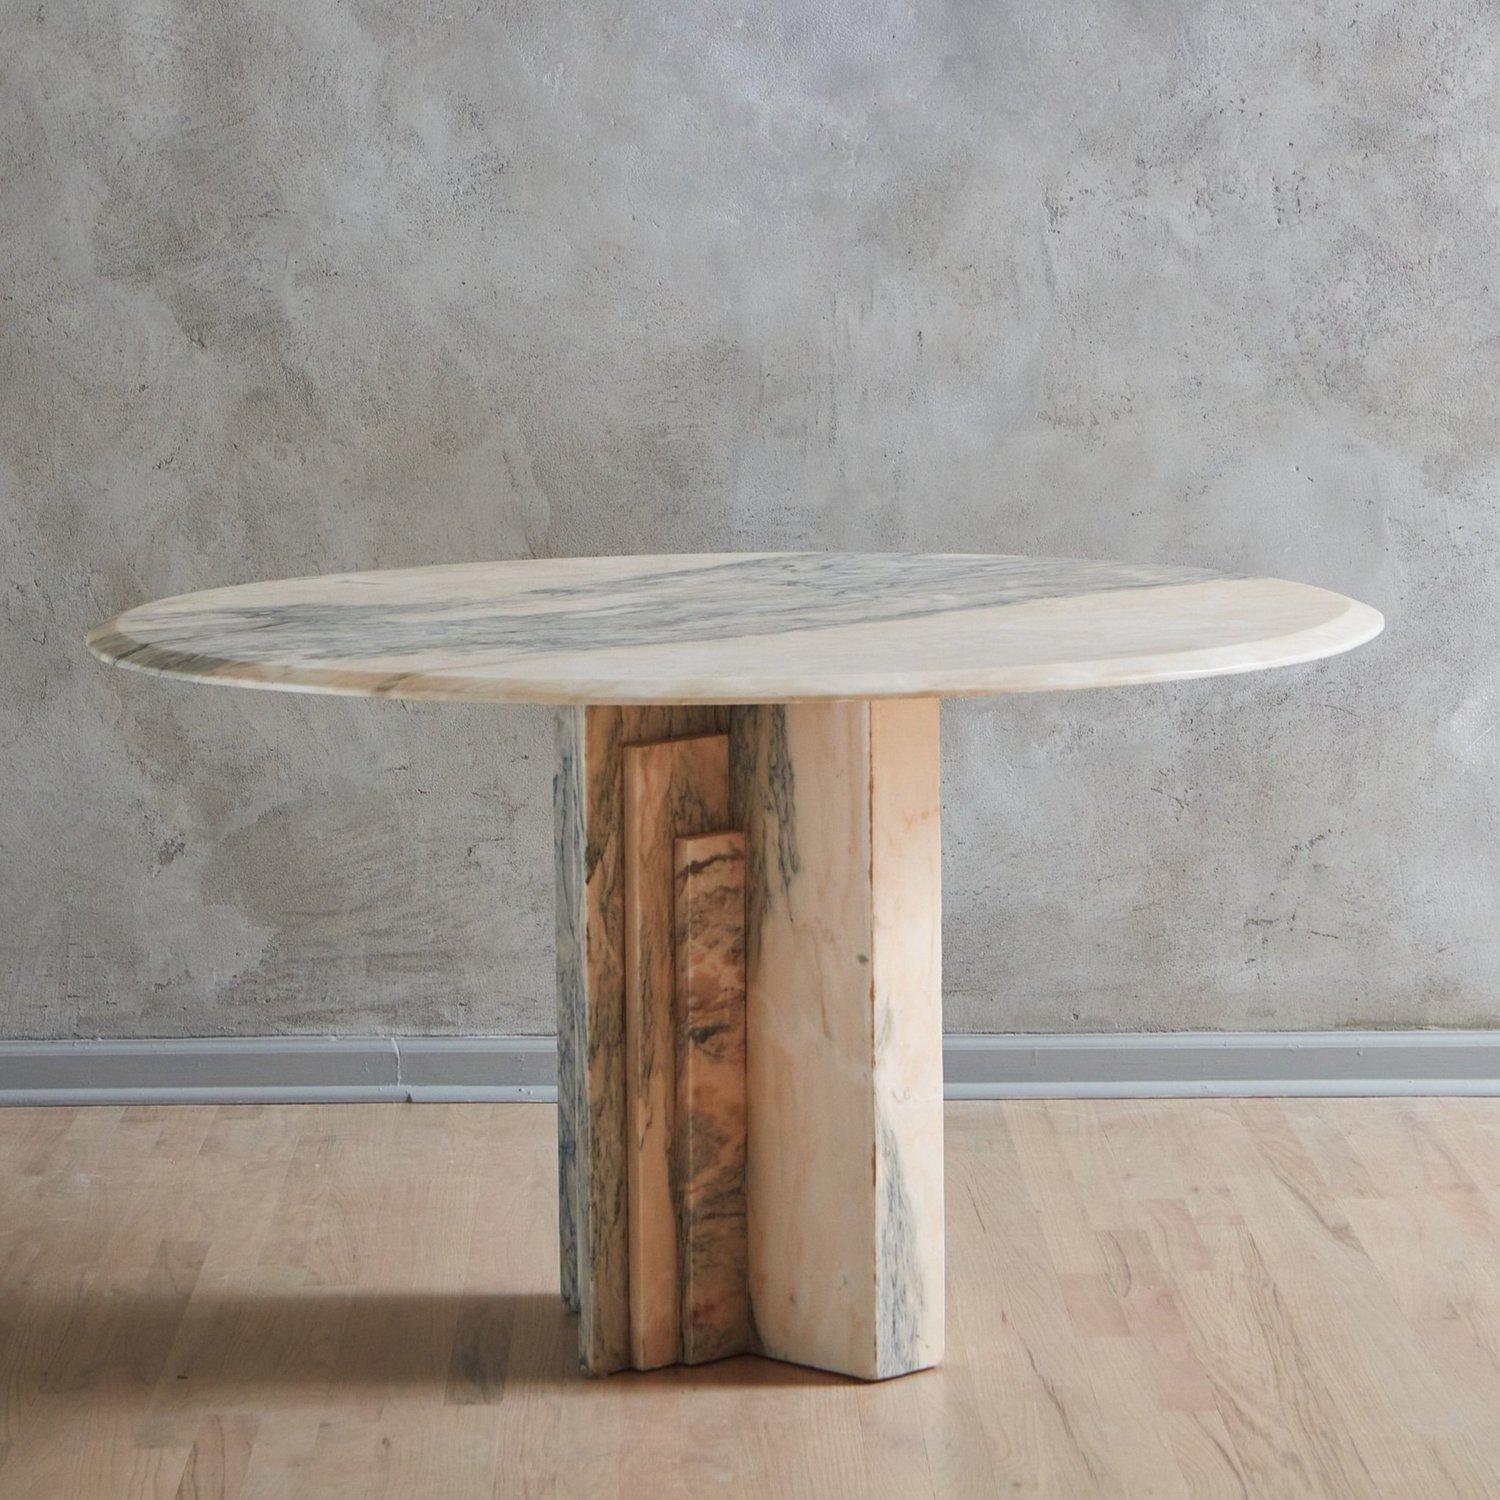 A 1970s French salmon hued marble dining table with gorgeous veining in a range of gray and taupe hues. This piece has a round tabletop with an elegant bevel edge and stands on an architectural, tiered base. Unmarked. Sourced in France, 1970s.